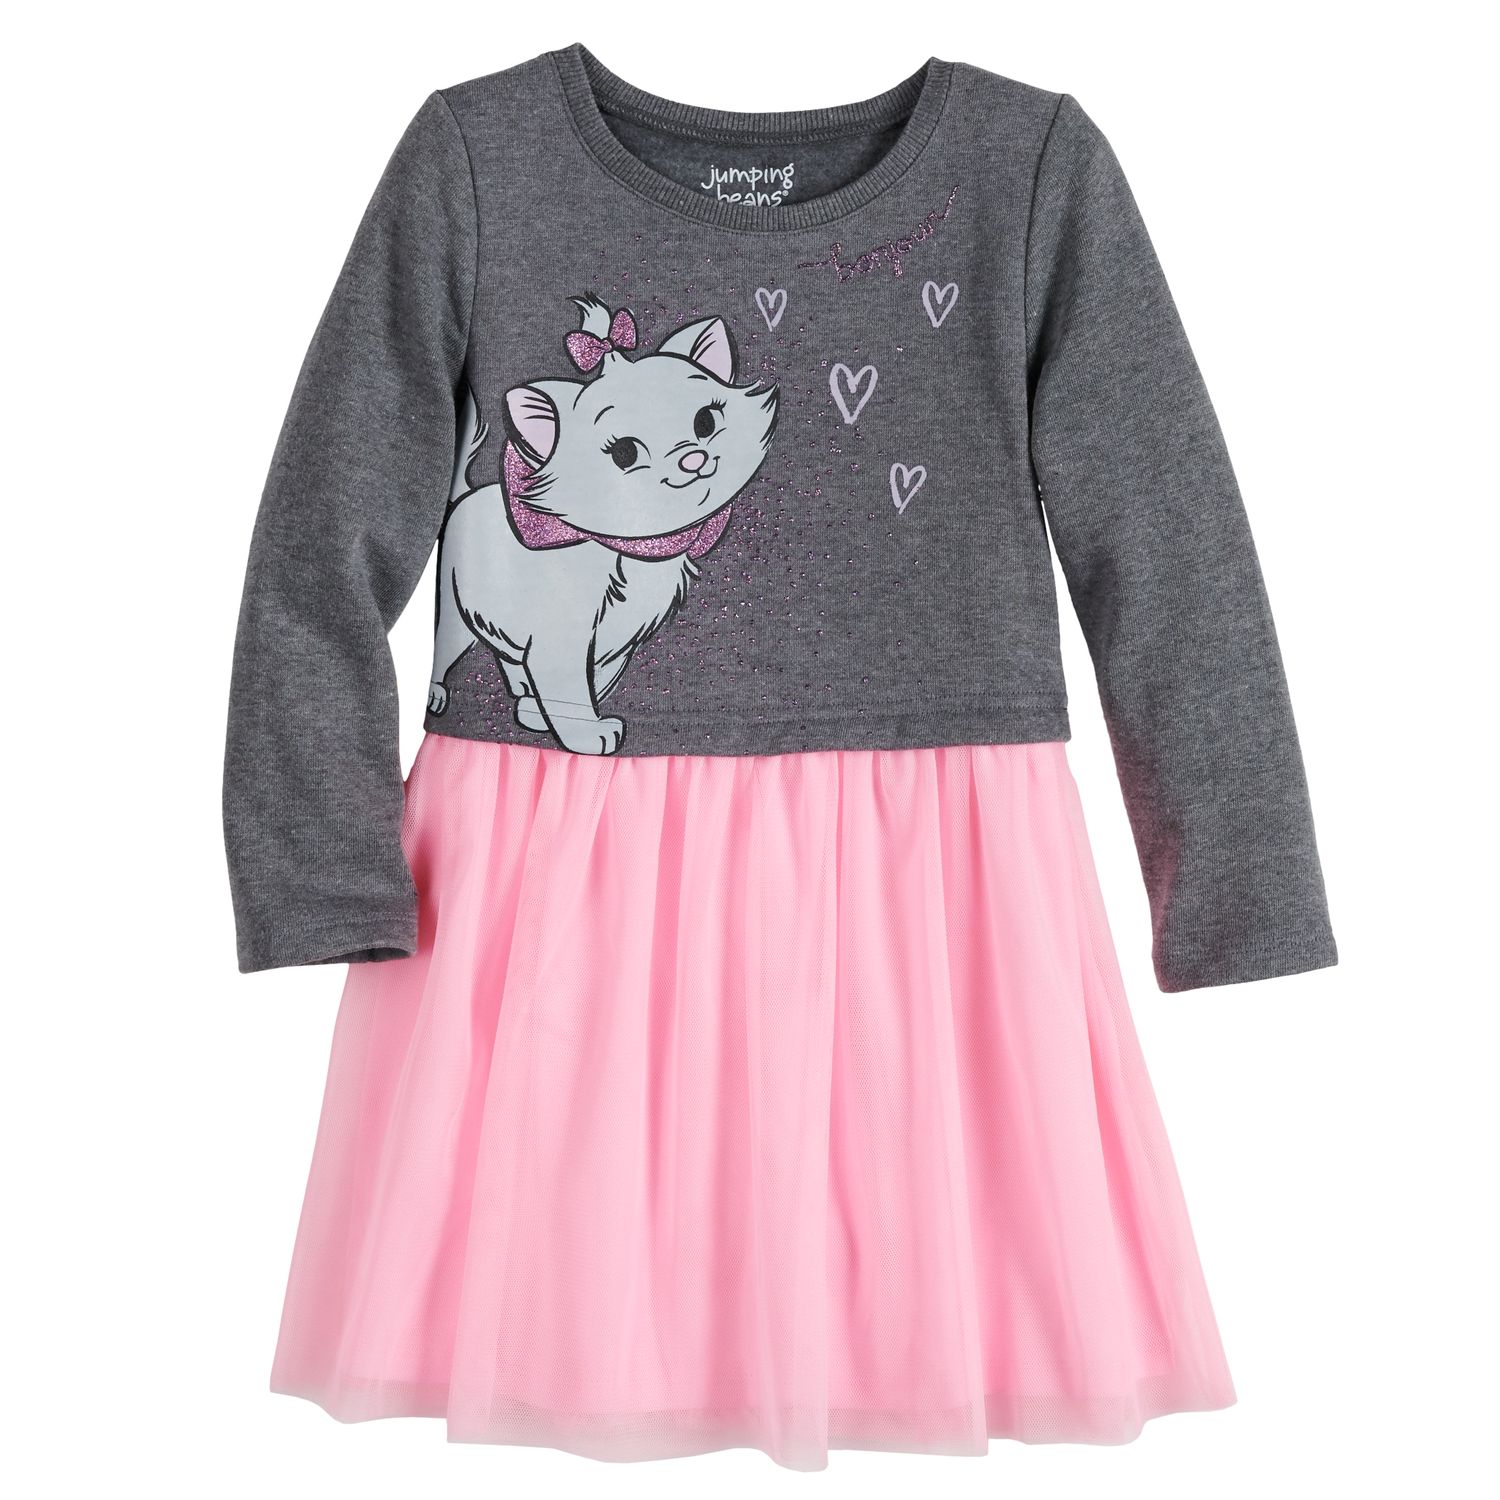 marie aristocats baby clothing